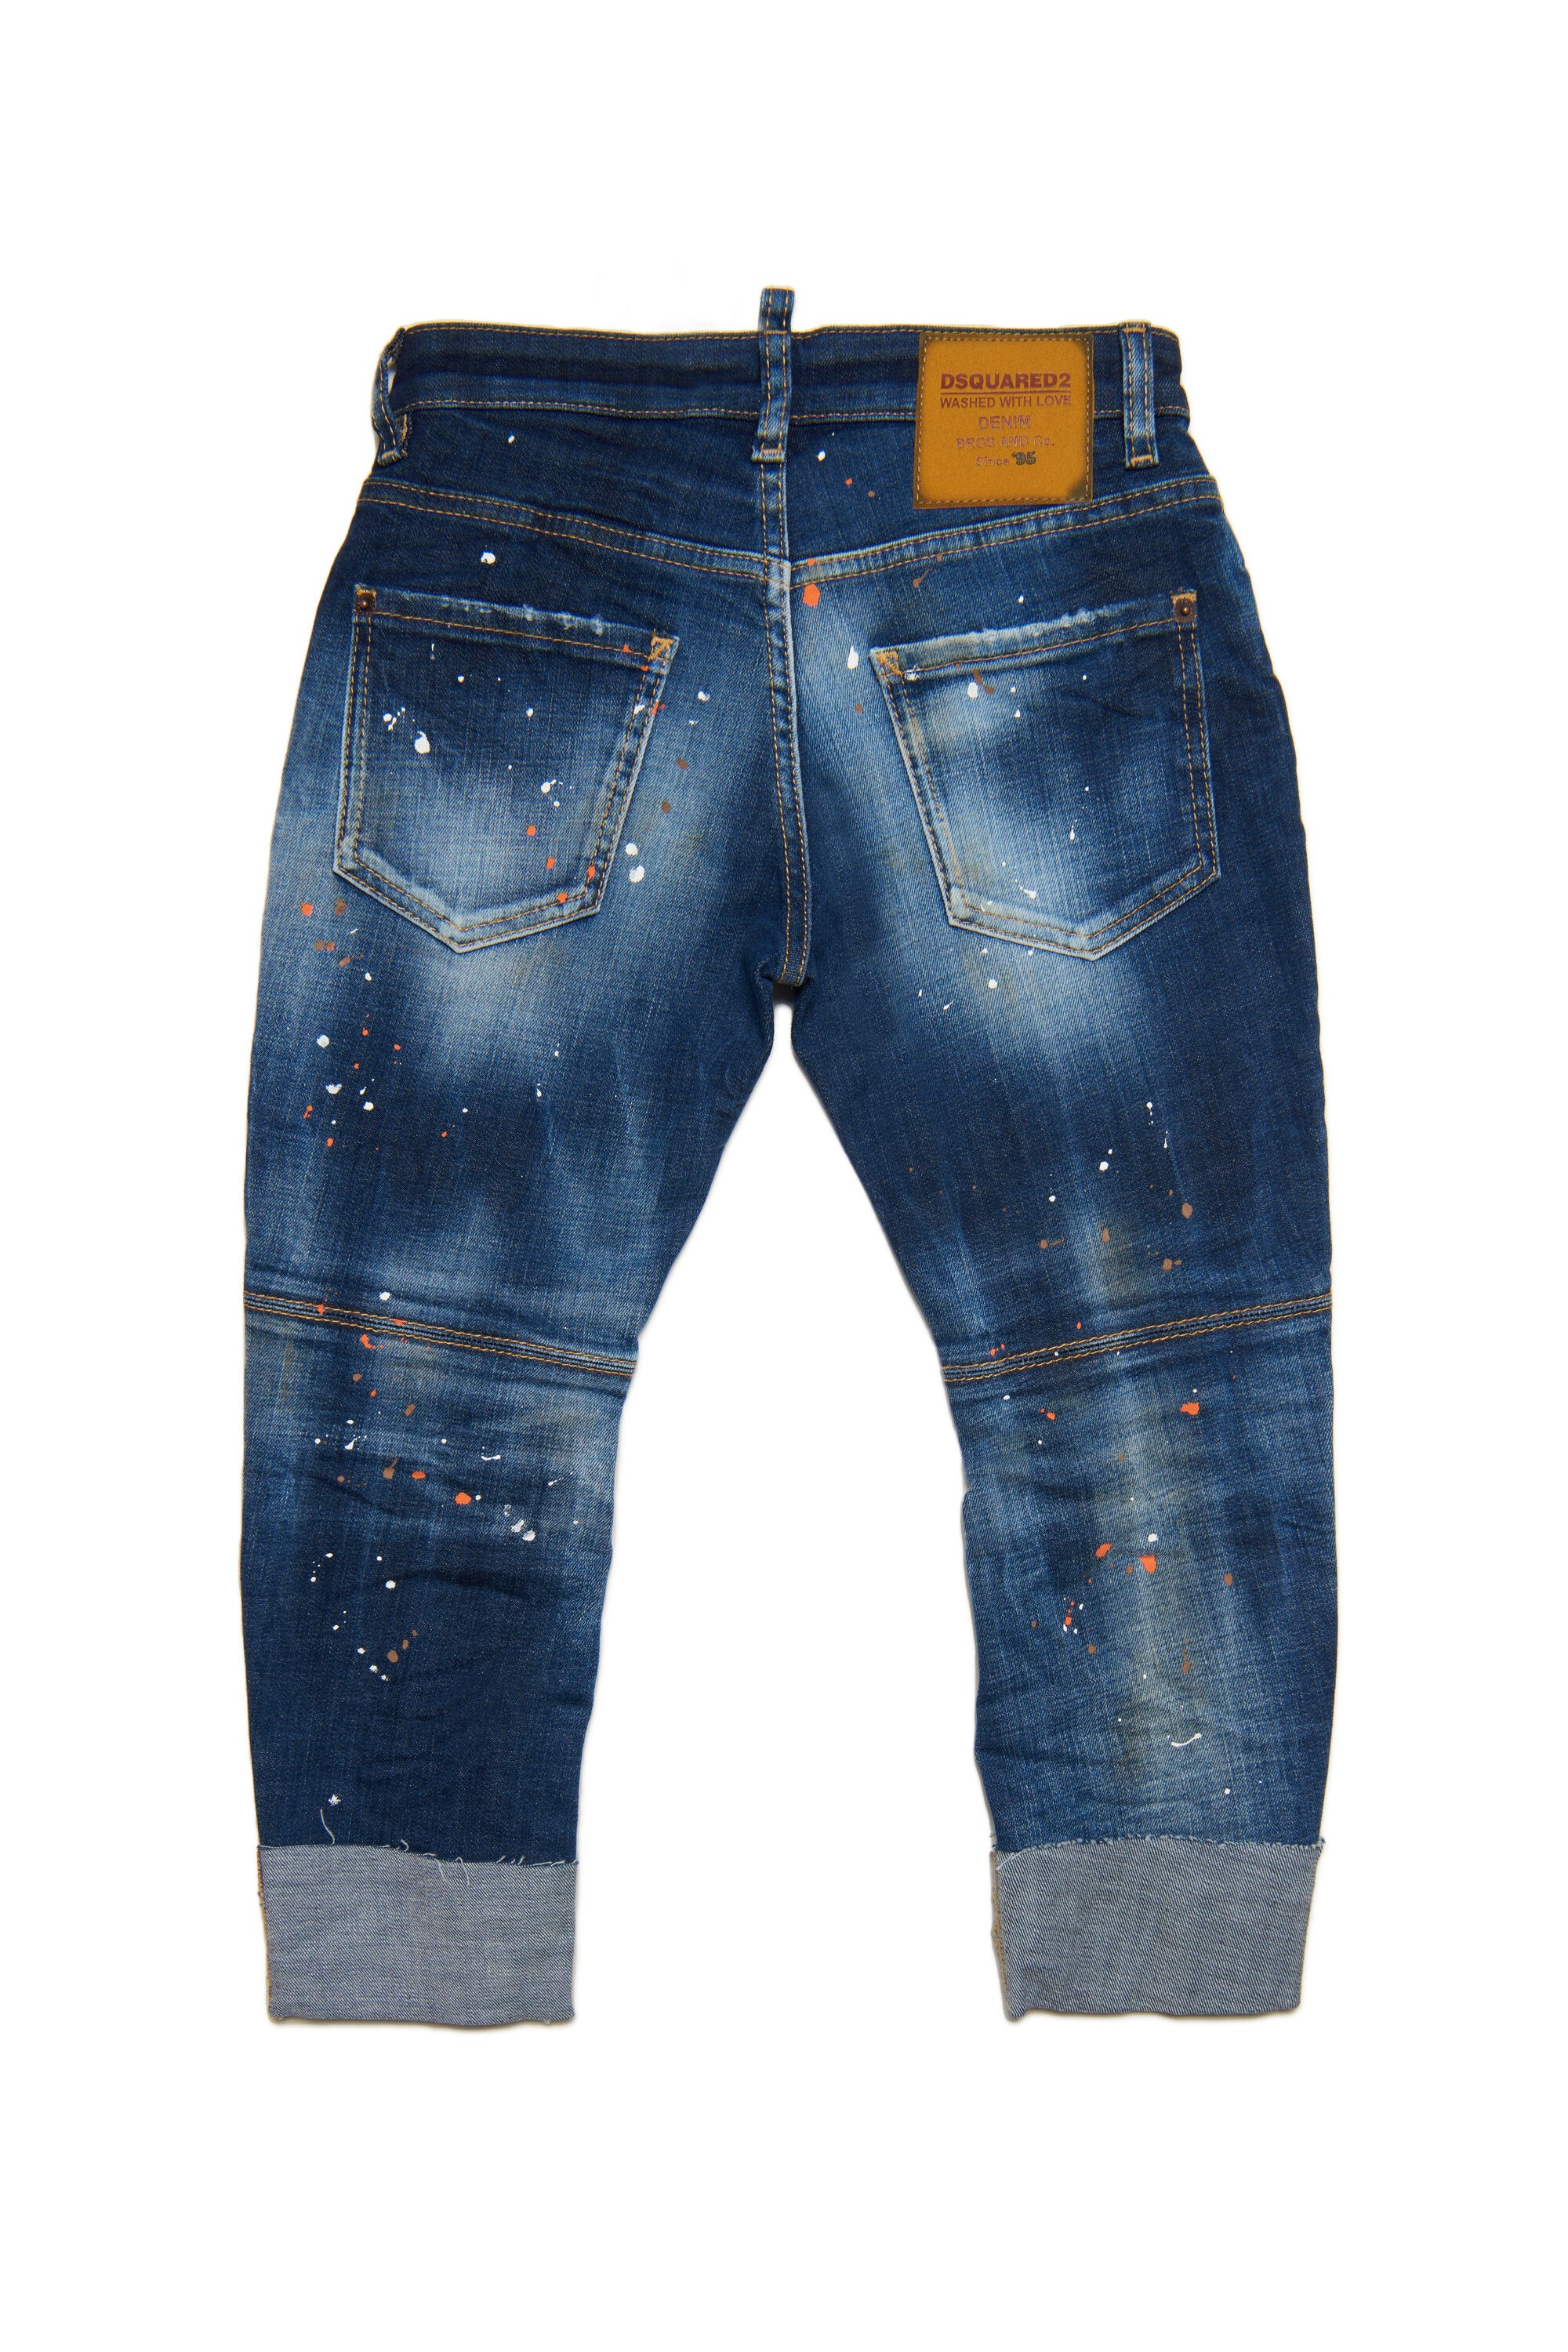 Shaded dark blue Sailor straight jeans with patches and spots